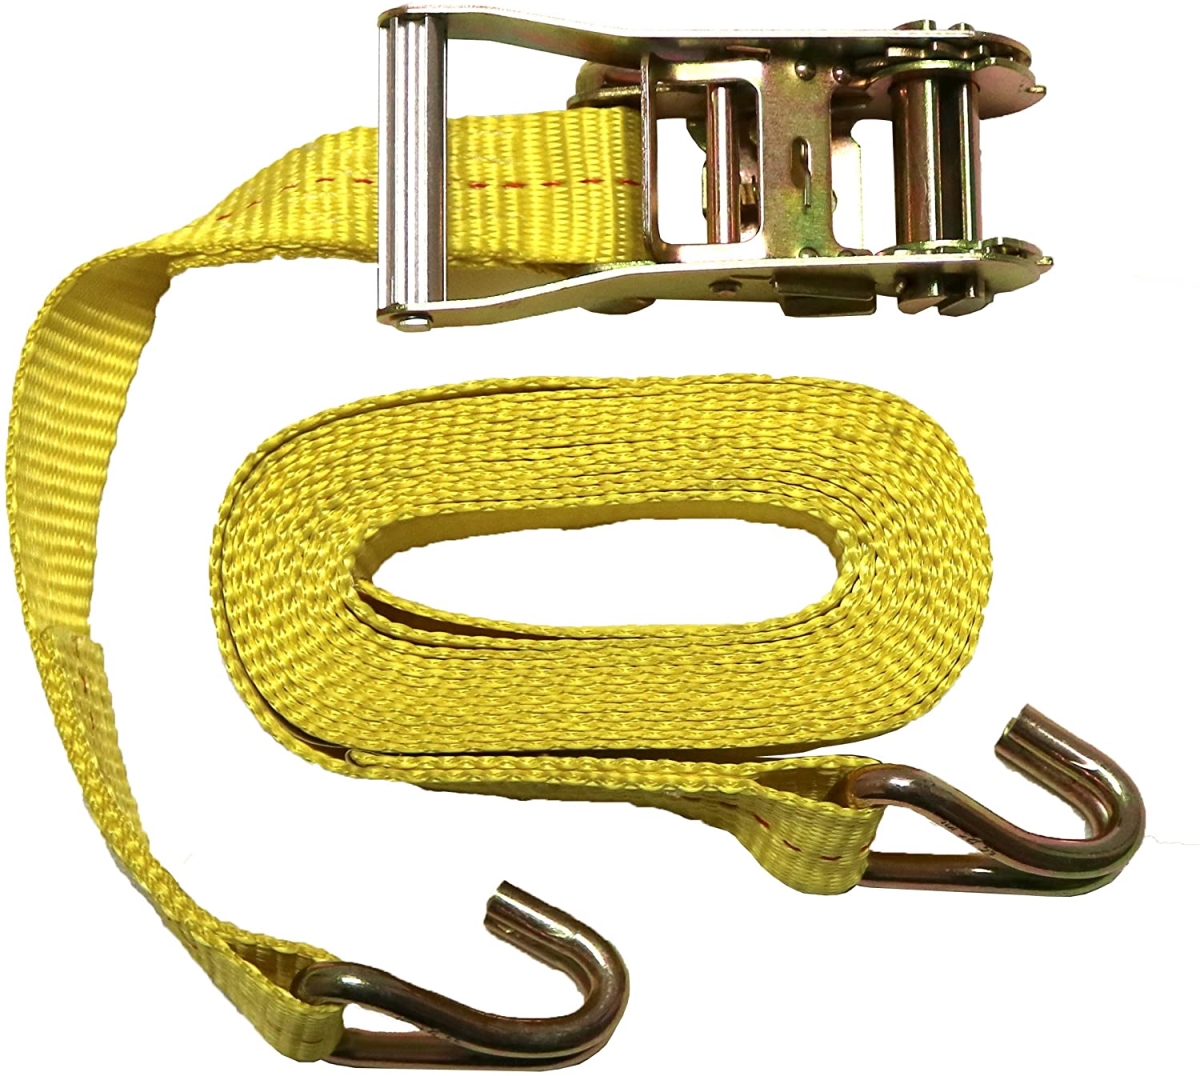 Picture of Ancra & S-Line SL101 1.5 in. x 16 ft. Ratchet Tie-Down with J-Hooks